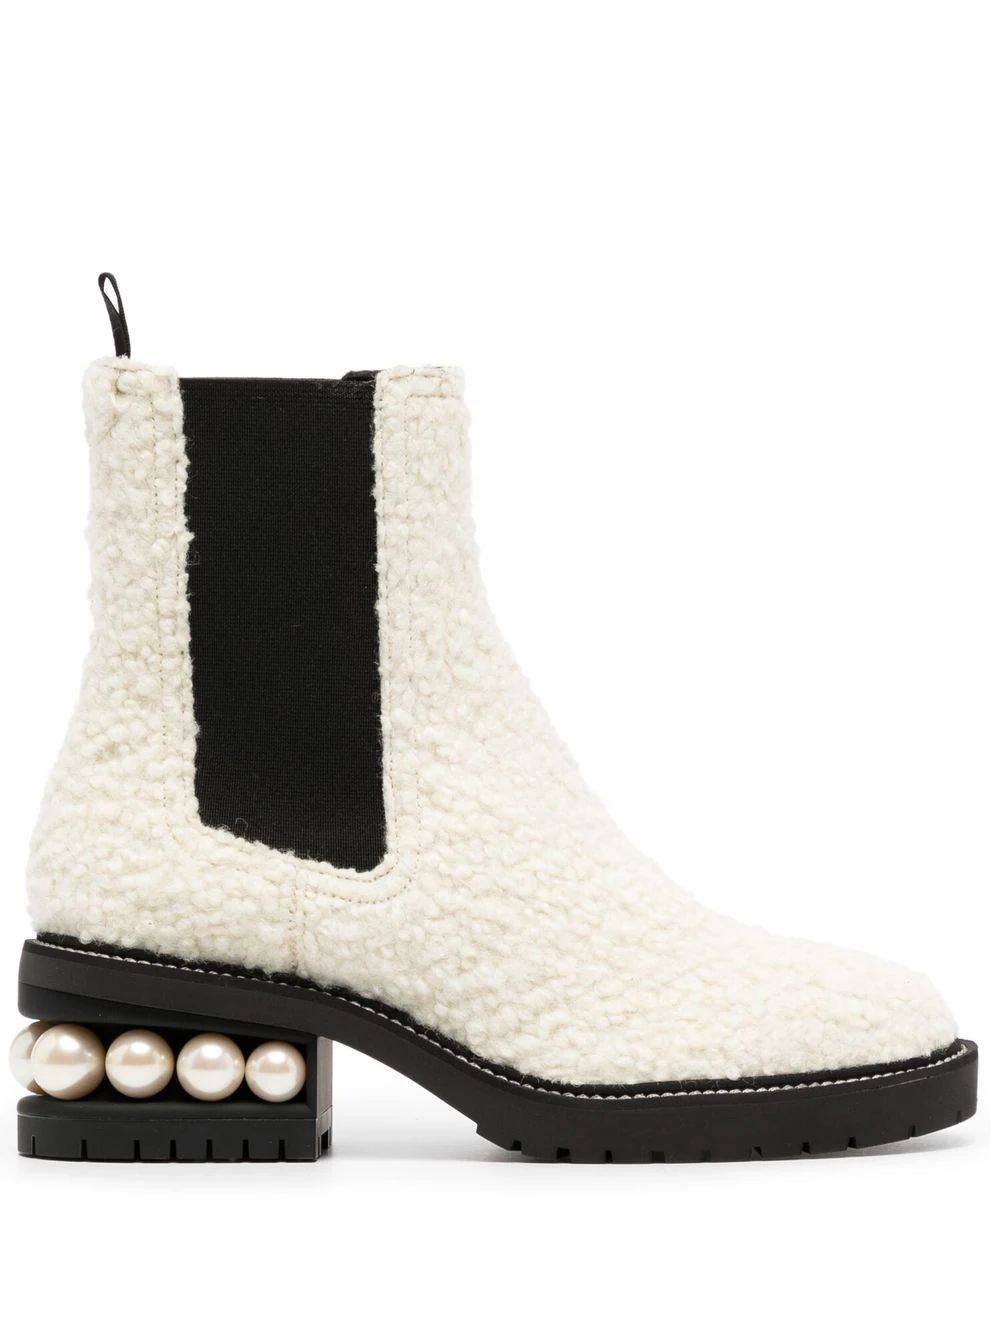 Casati pearl-embellished ankle boots | Farfetch Global